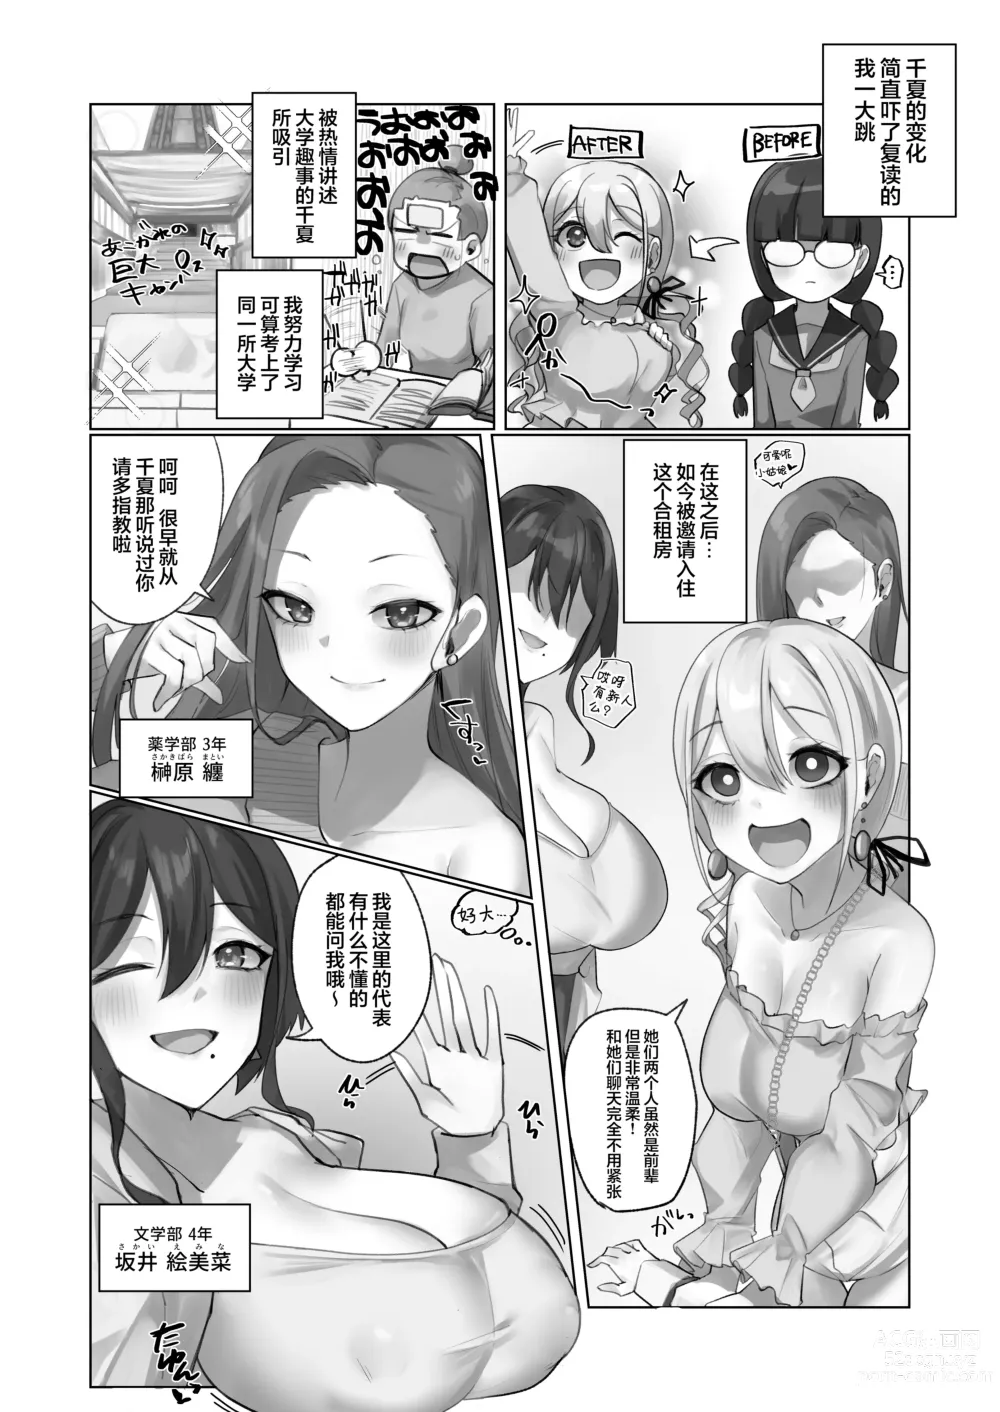 Page 3 of doujinshi Youkoso  Share House e